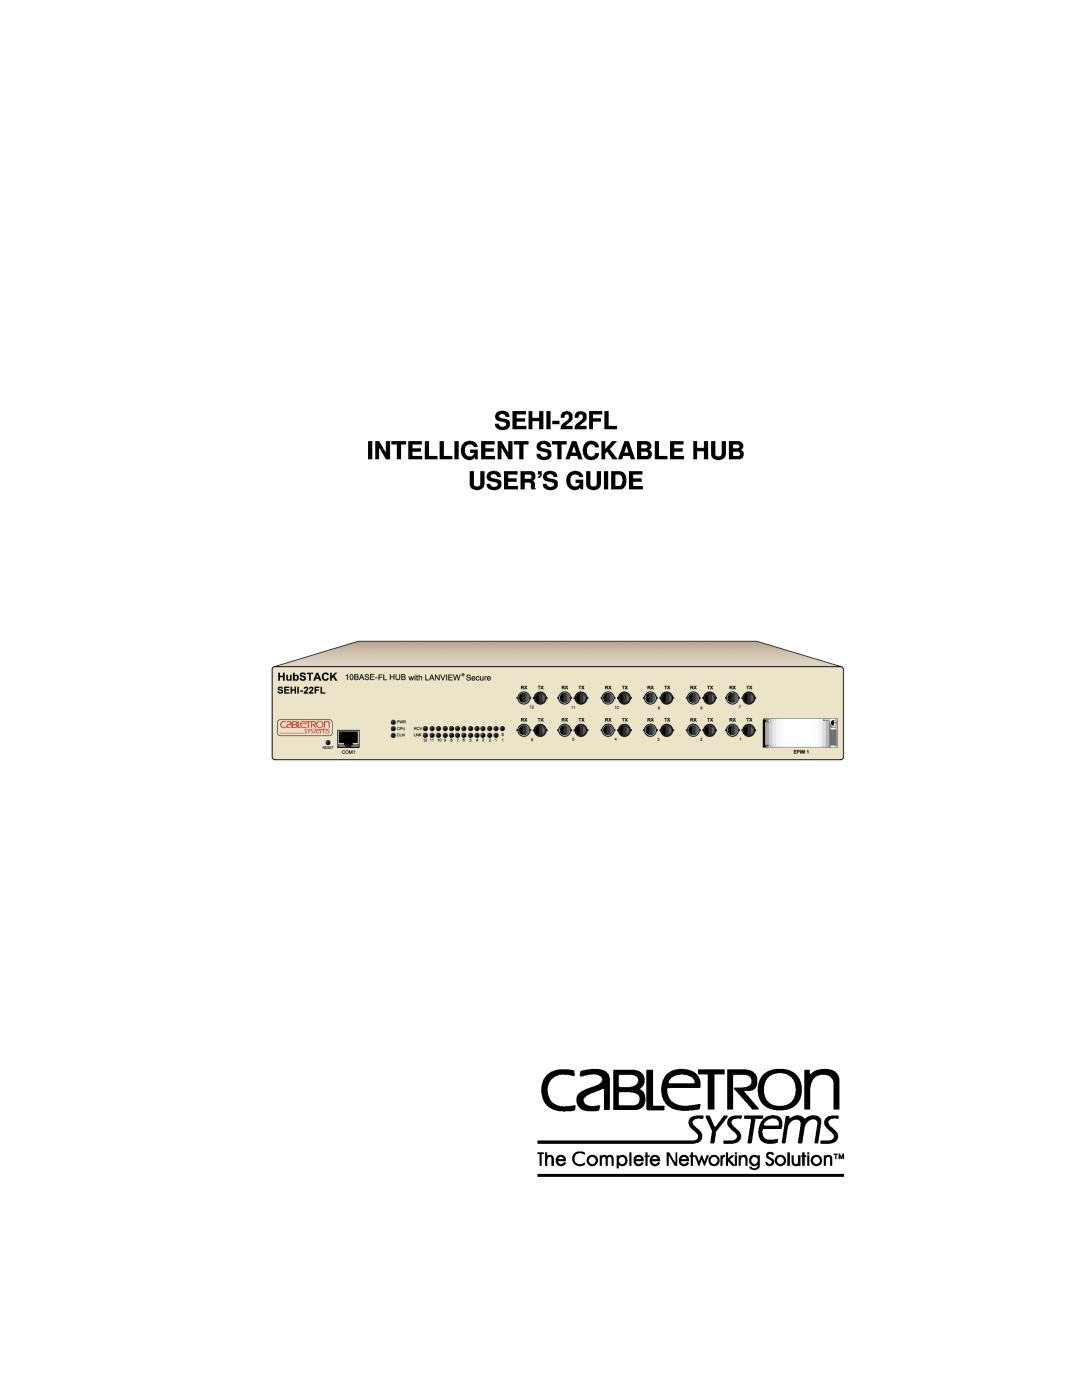 Cabletron Systems manual SEHI-22FL INTELLIGENT STACKABLE HUB USER’S GUIDE 